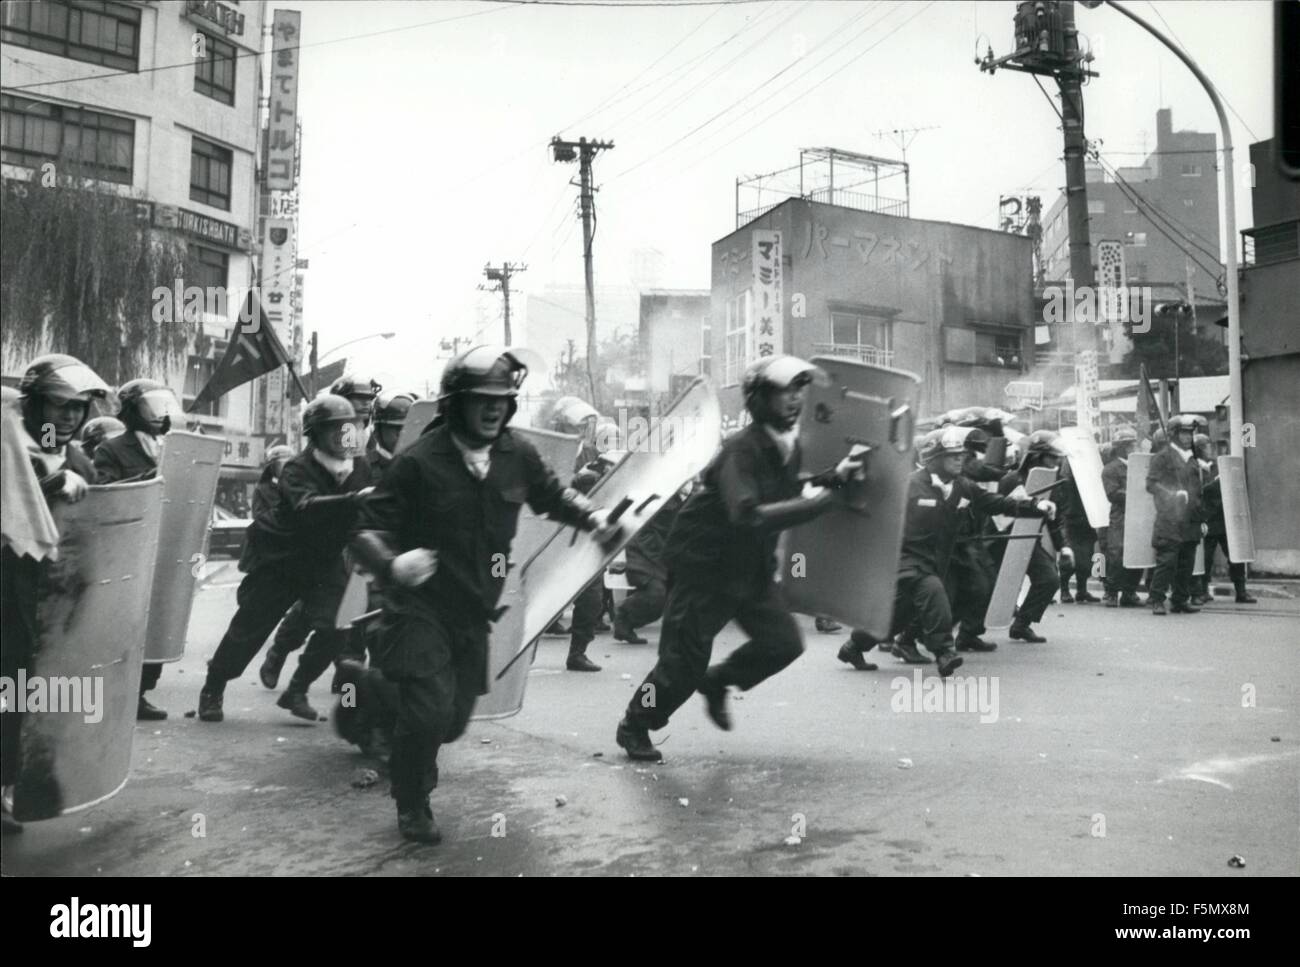 1980-riots-in-tokyo-over-okinawa-reversion-japanese-radical-students-F5MX8M.jpg